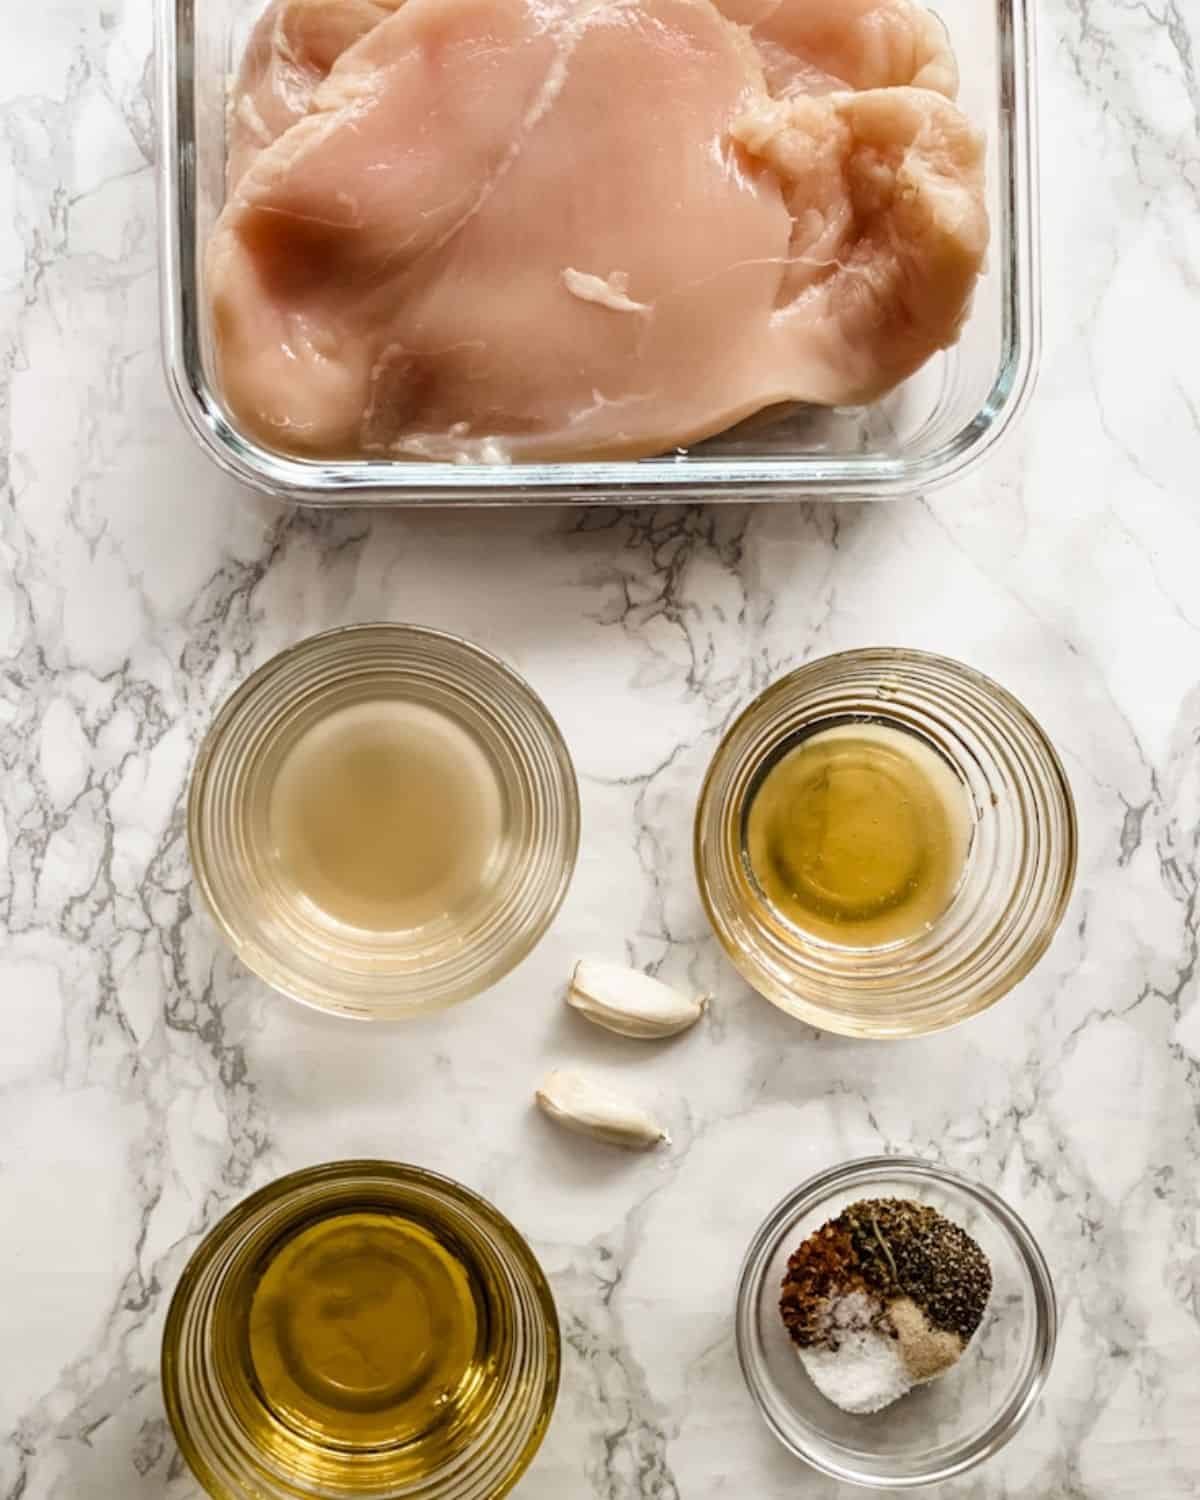 The ingredients to make an italian marinade for grilled chicken